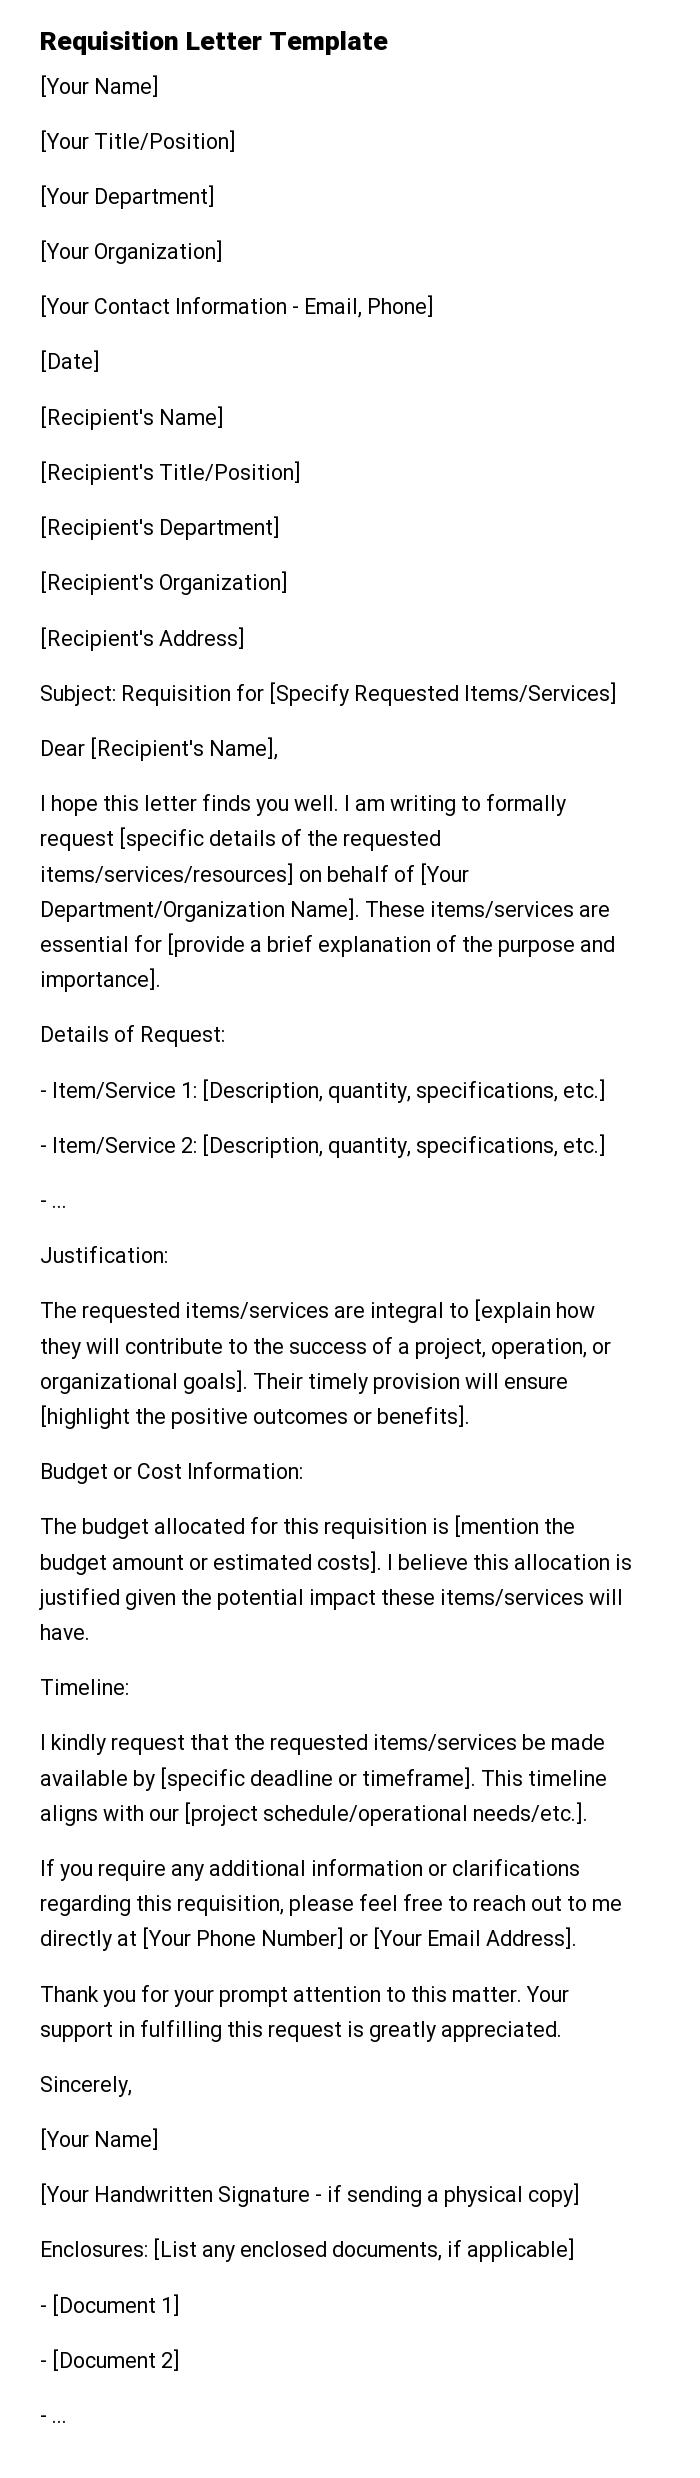 Requisition Letter Template